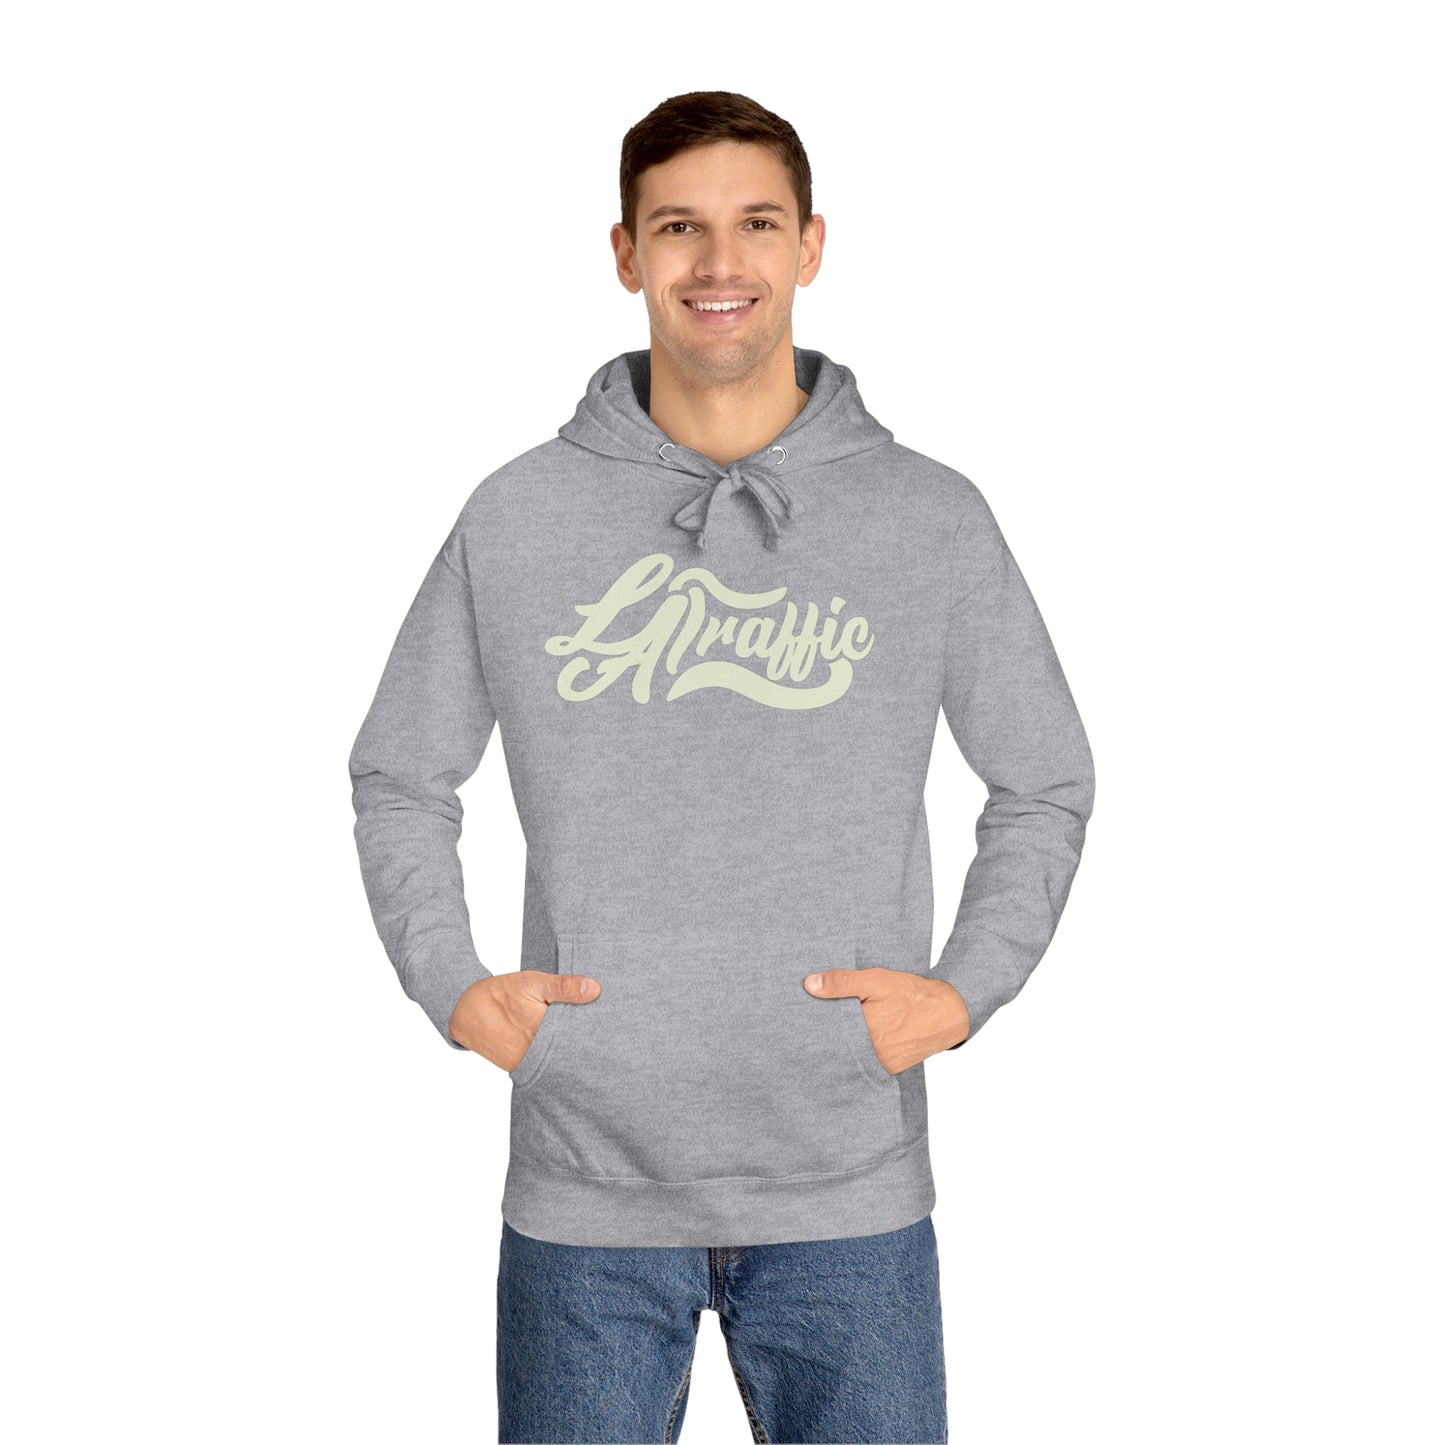 We are the Streets Hoodie